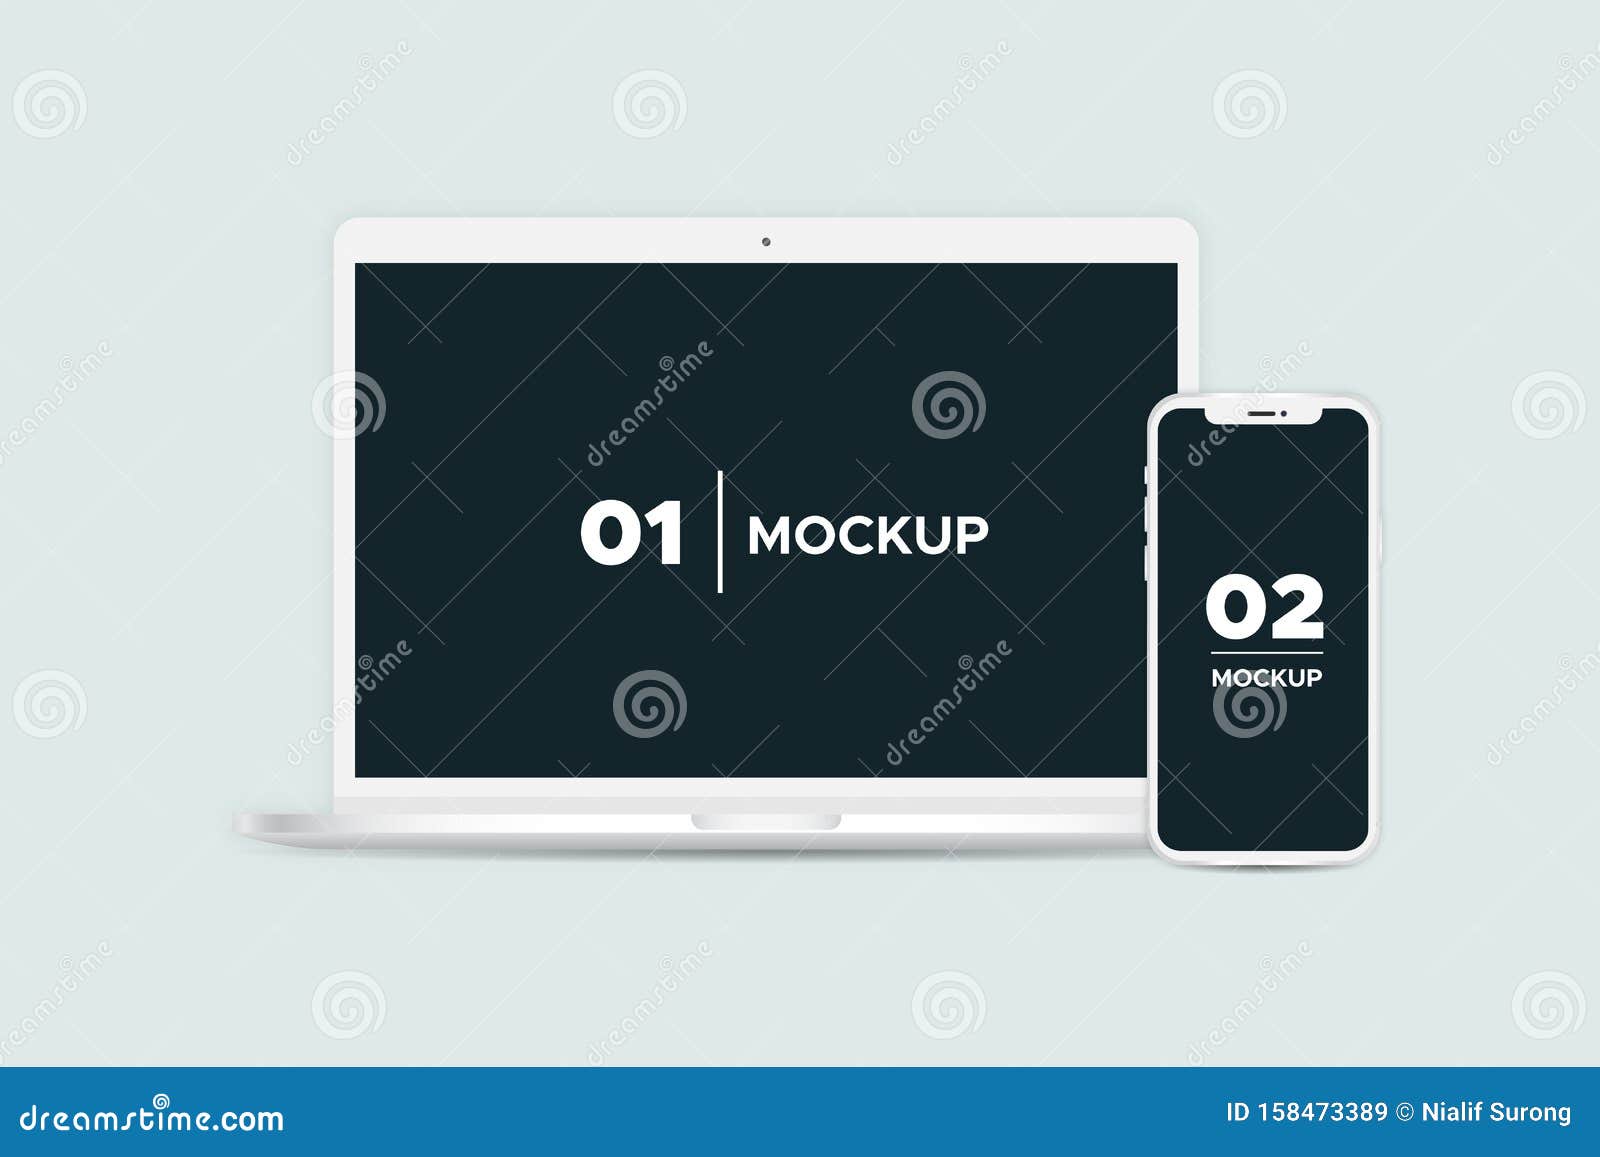 laptop and iphone mockup  on background.